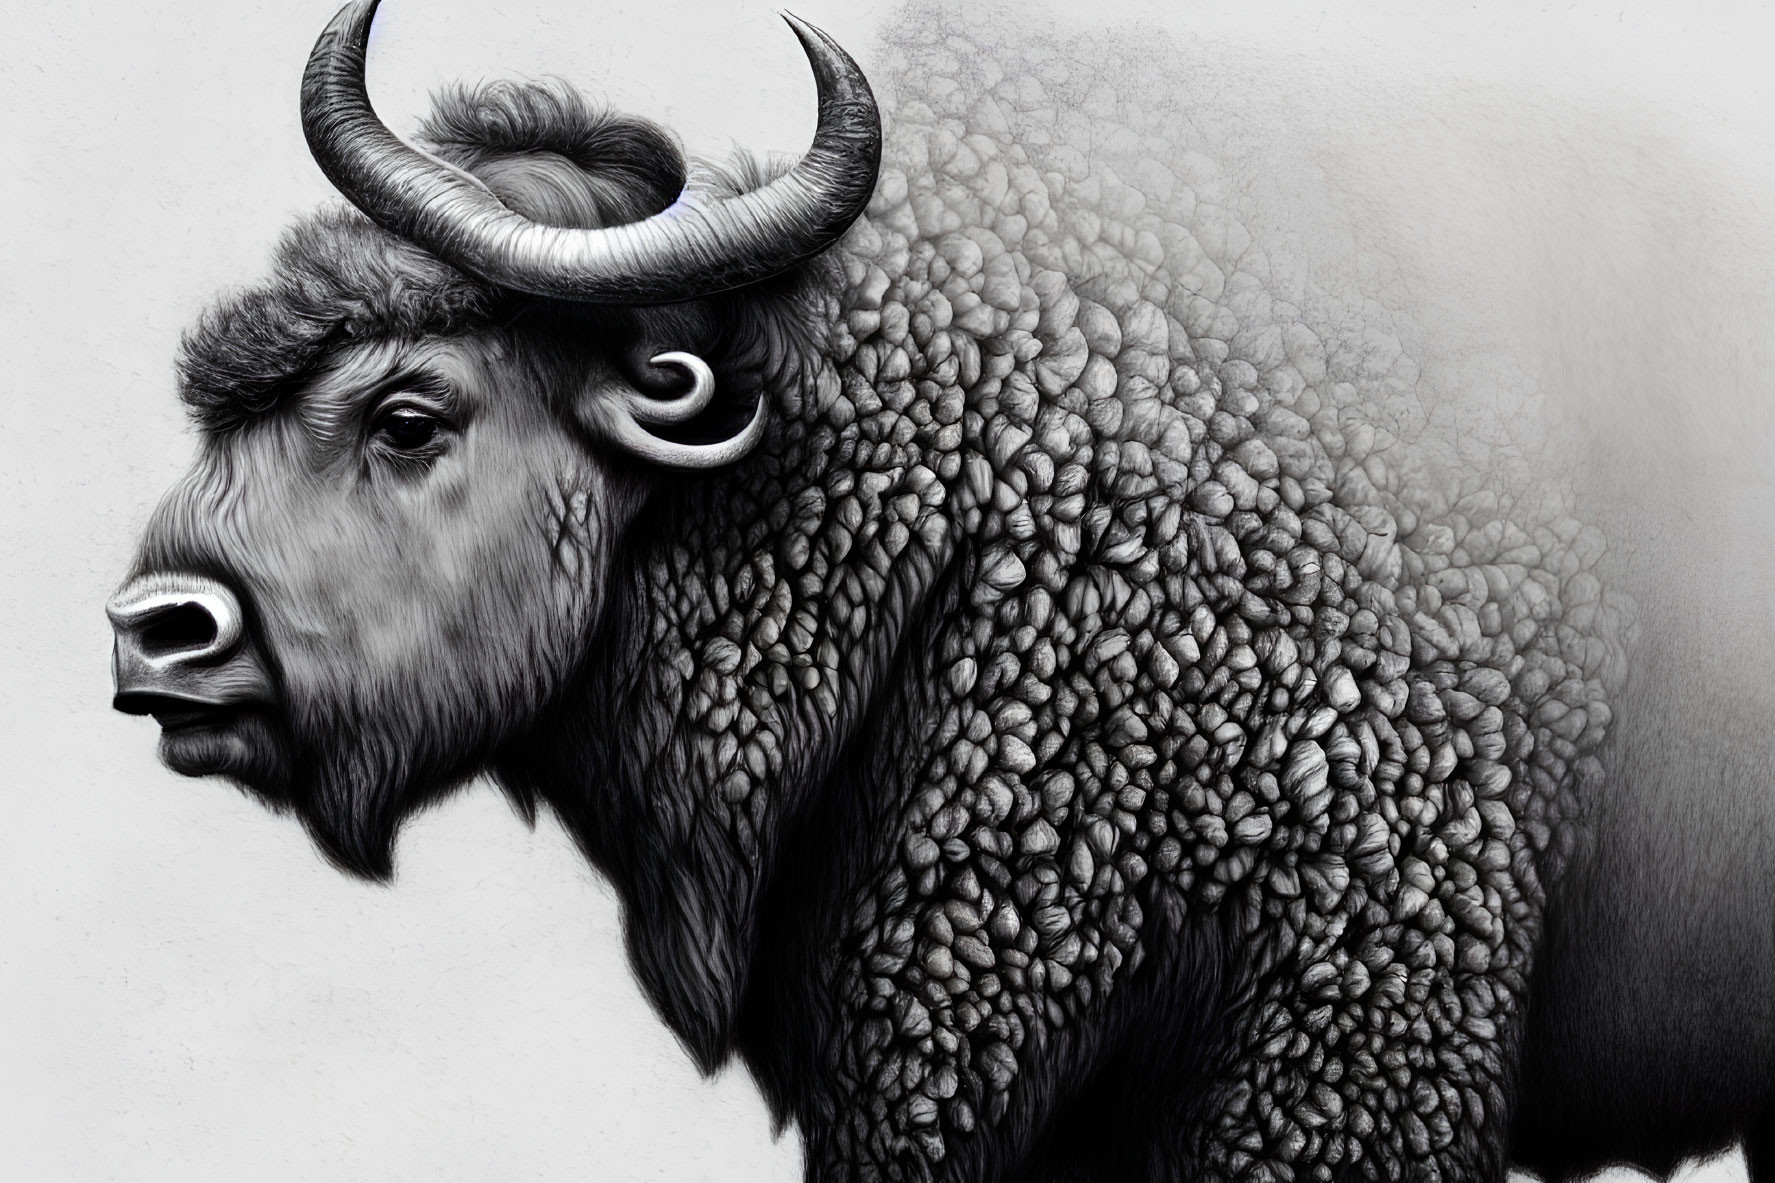 Detailed Black and White Muskox Illustration with Intricate Fur Texture and Prominent Curved Horns